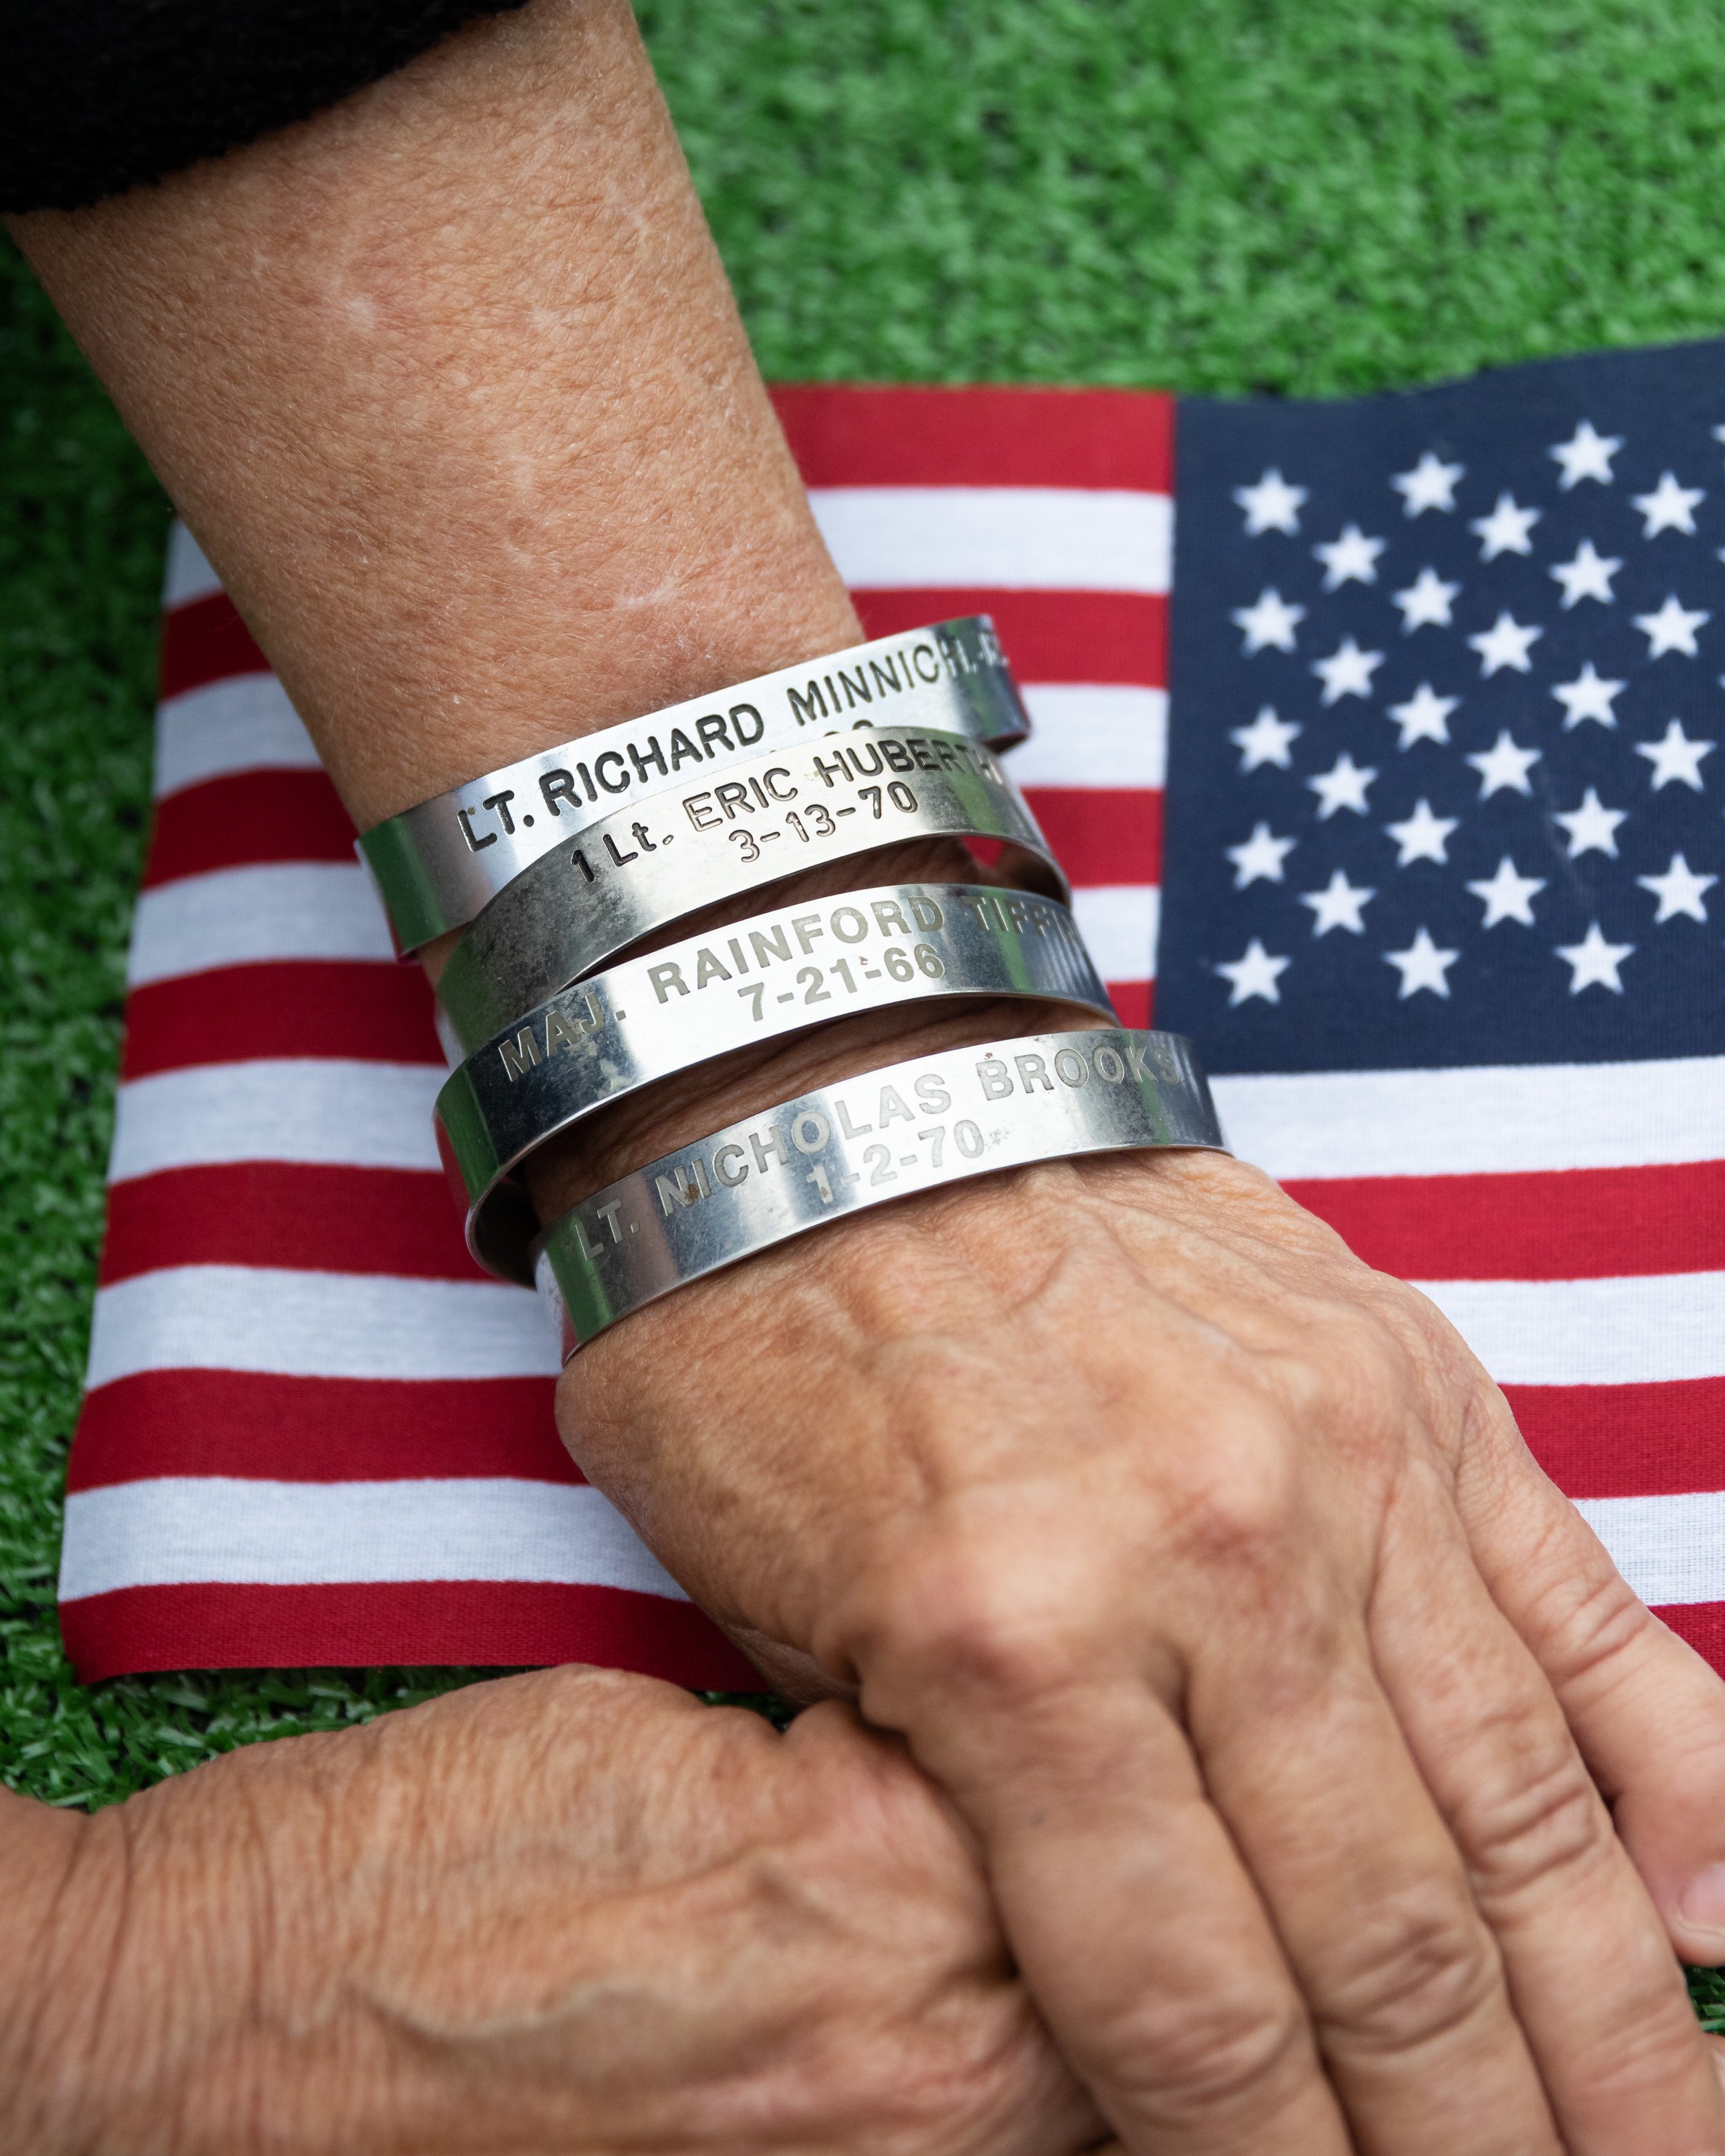  Robin Dominguez wearing POW/MIA bracelets rests her hands on the American Flag during the Memorial Day Celebration at Los Angeles National Cemetery in Los Angeles, Calif., on Monday, May 29, 2023. The bracelets have the names of those who are prison